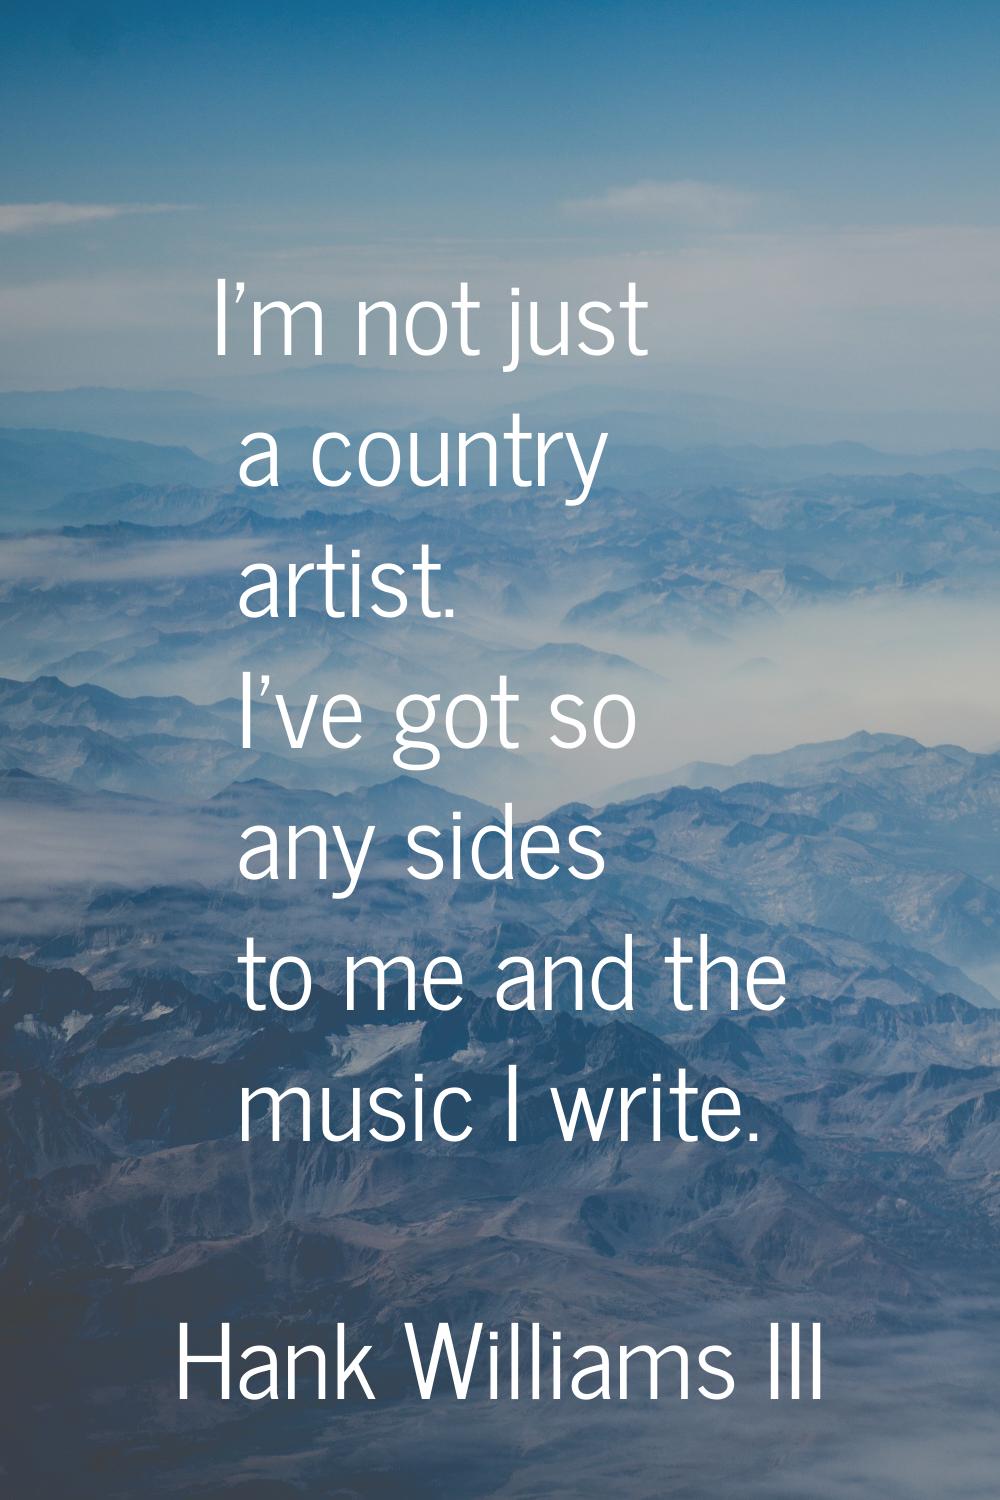 I'm not just a country artist. I've got so any sides to me and the music I write.